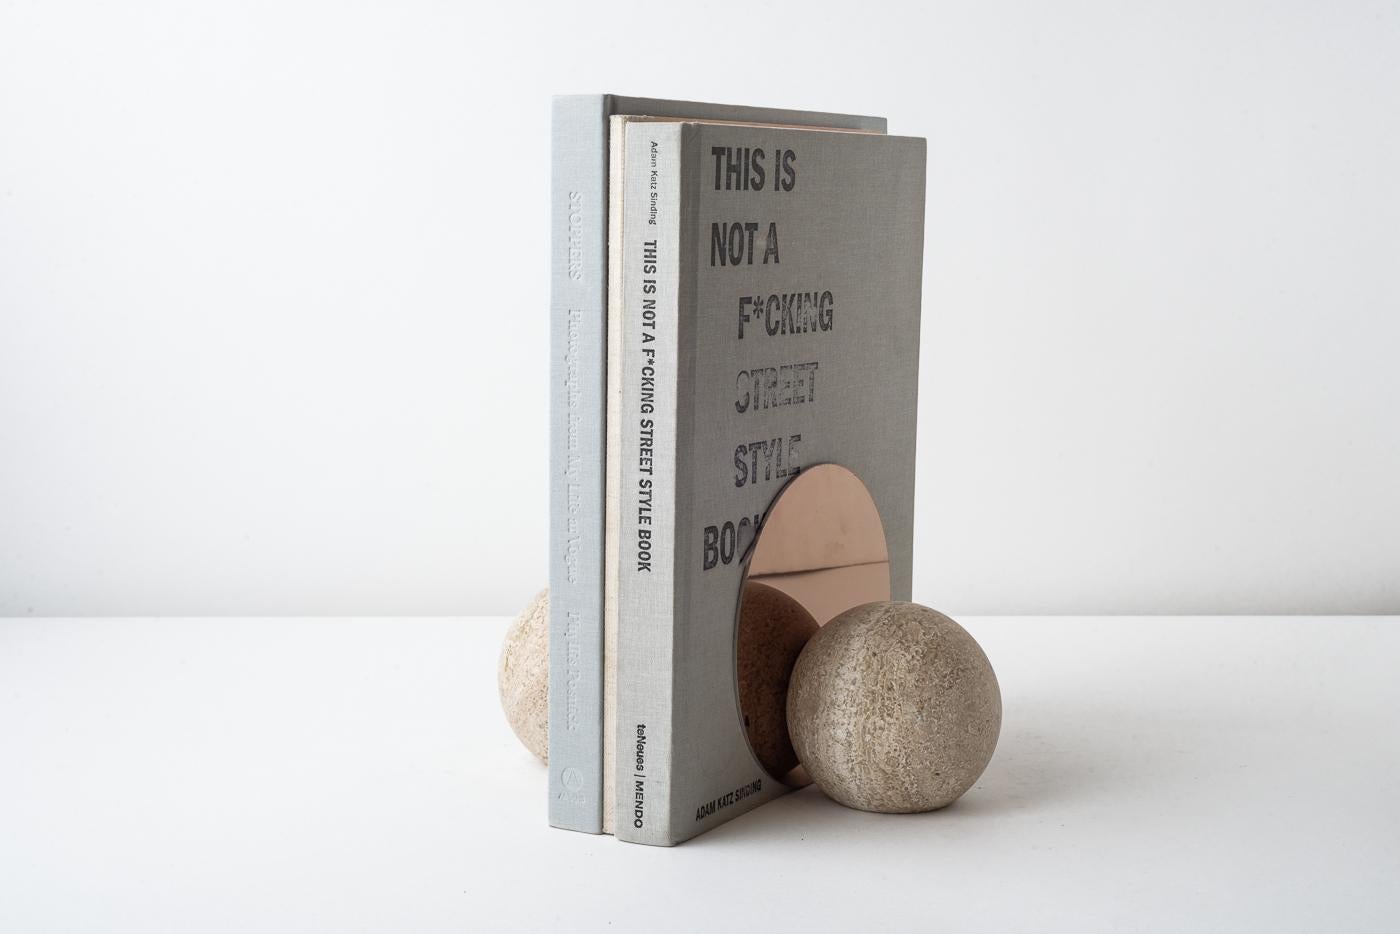 Introducing a truly luxurious addition to your personal library - a stunning pair of hand-carved marble bookends from the artisanal experts at bruci. These spherical bookends are exquisitely detailed with a vertical stainless steel plate boasting a